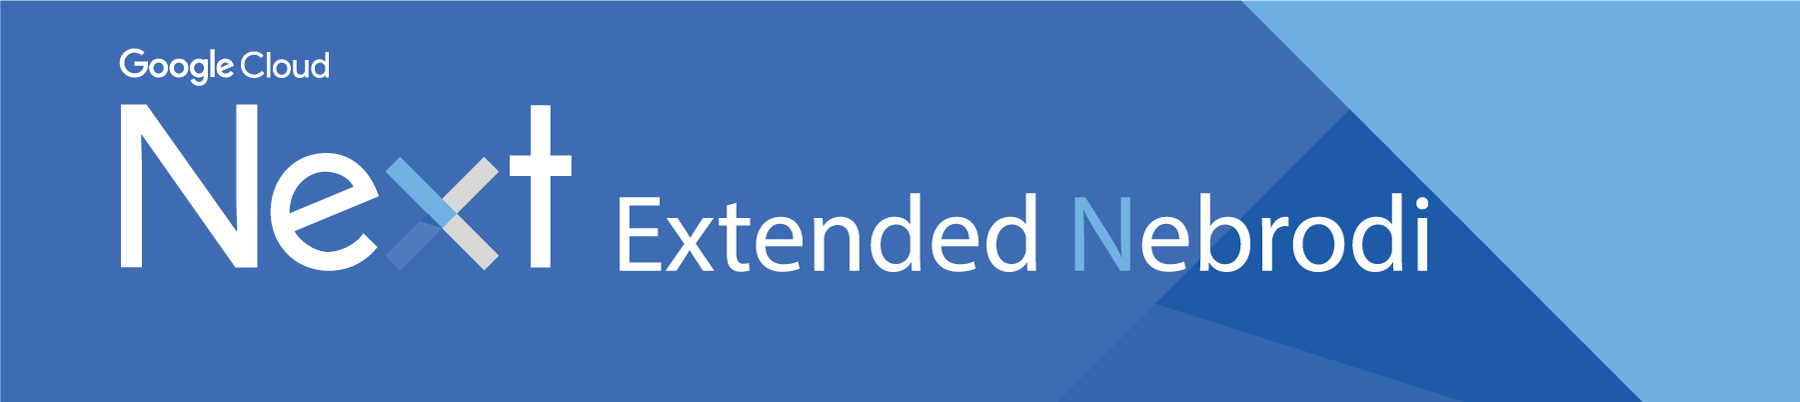 google cloud next extended gdg